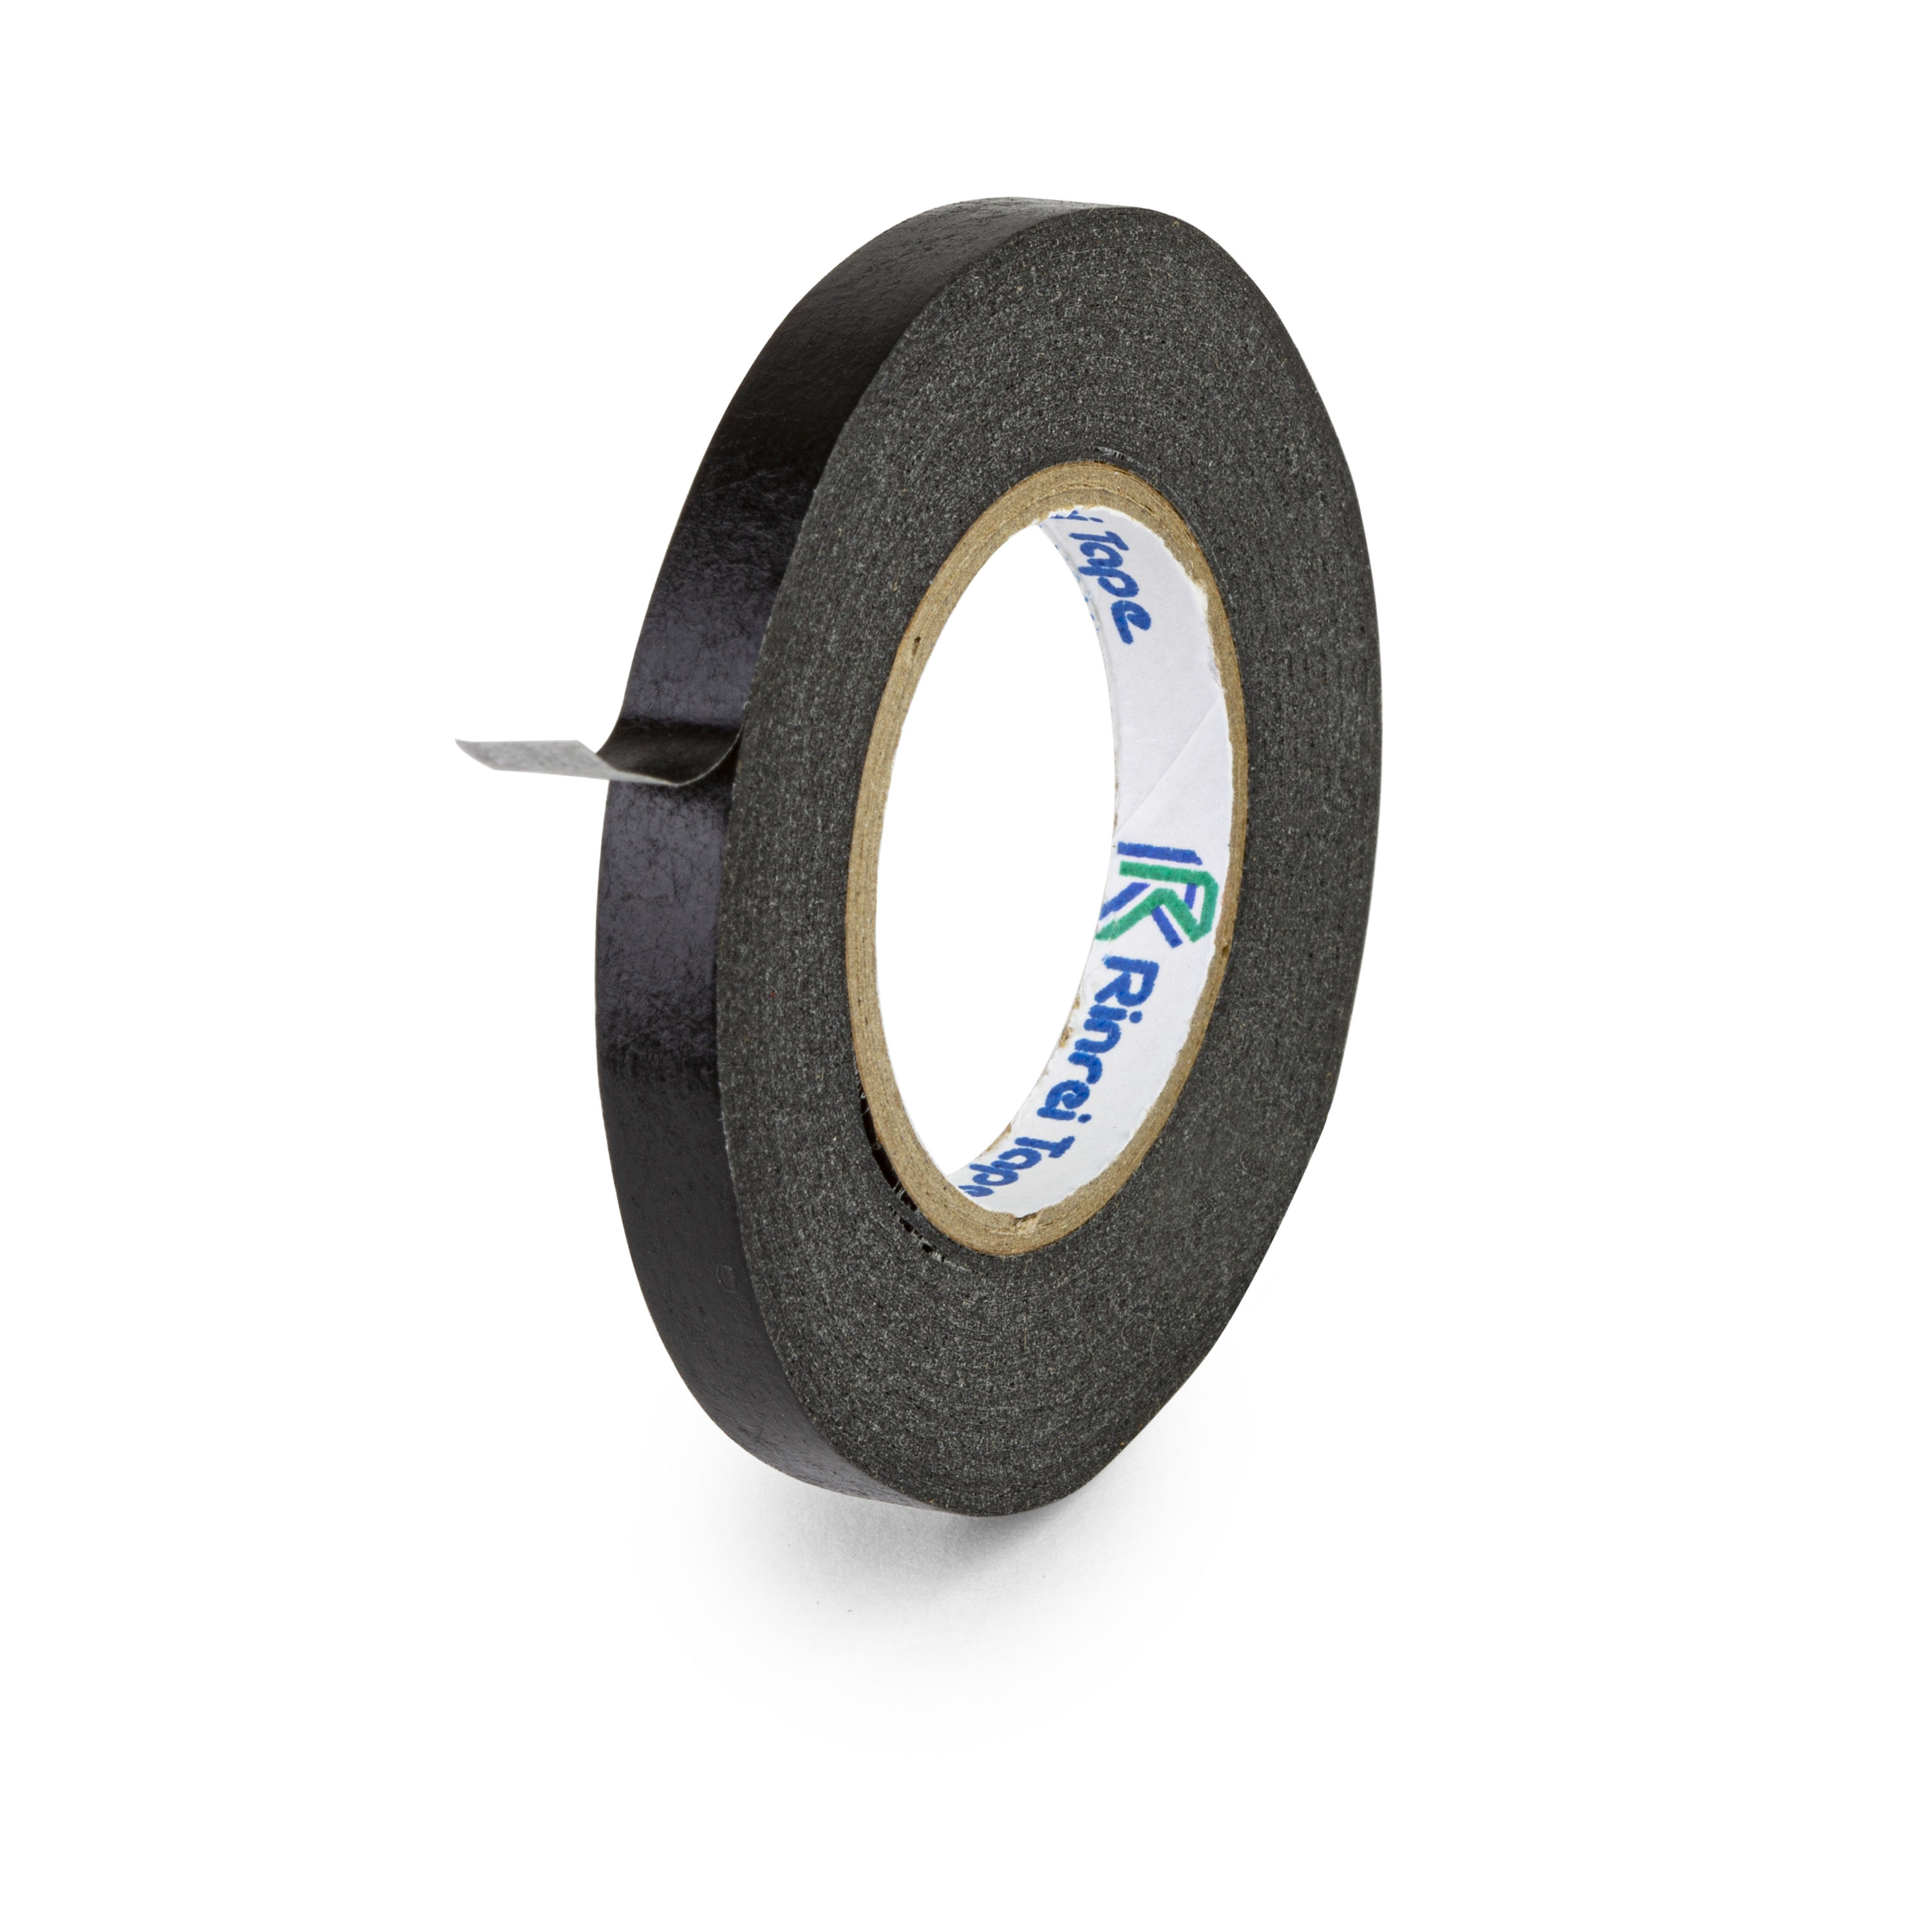 Pickup Coil Tape, Black Paper, 1/4 Wide from StewMac. Golden Age 5951